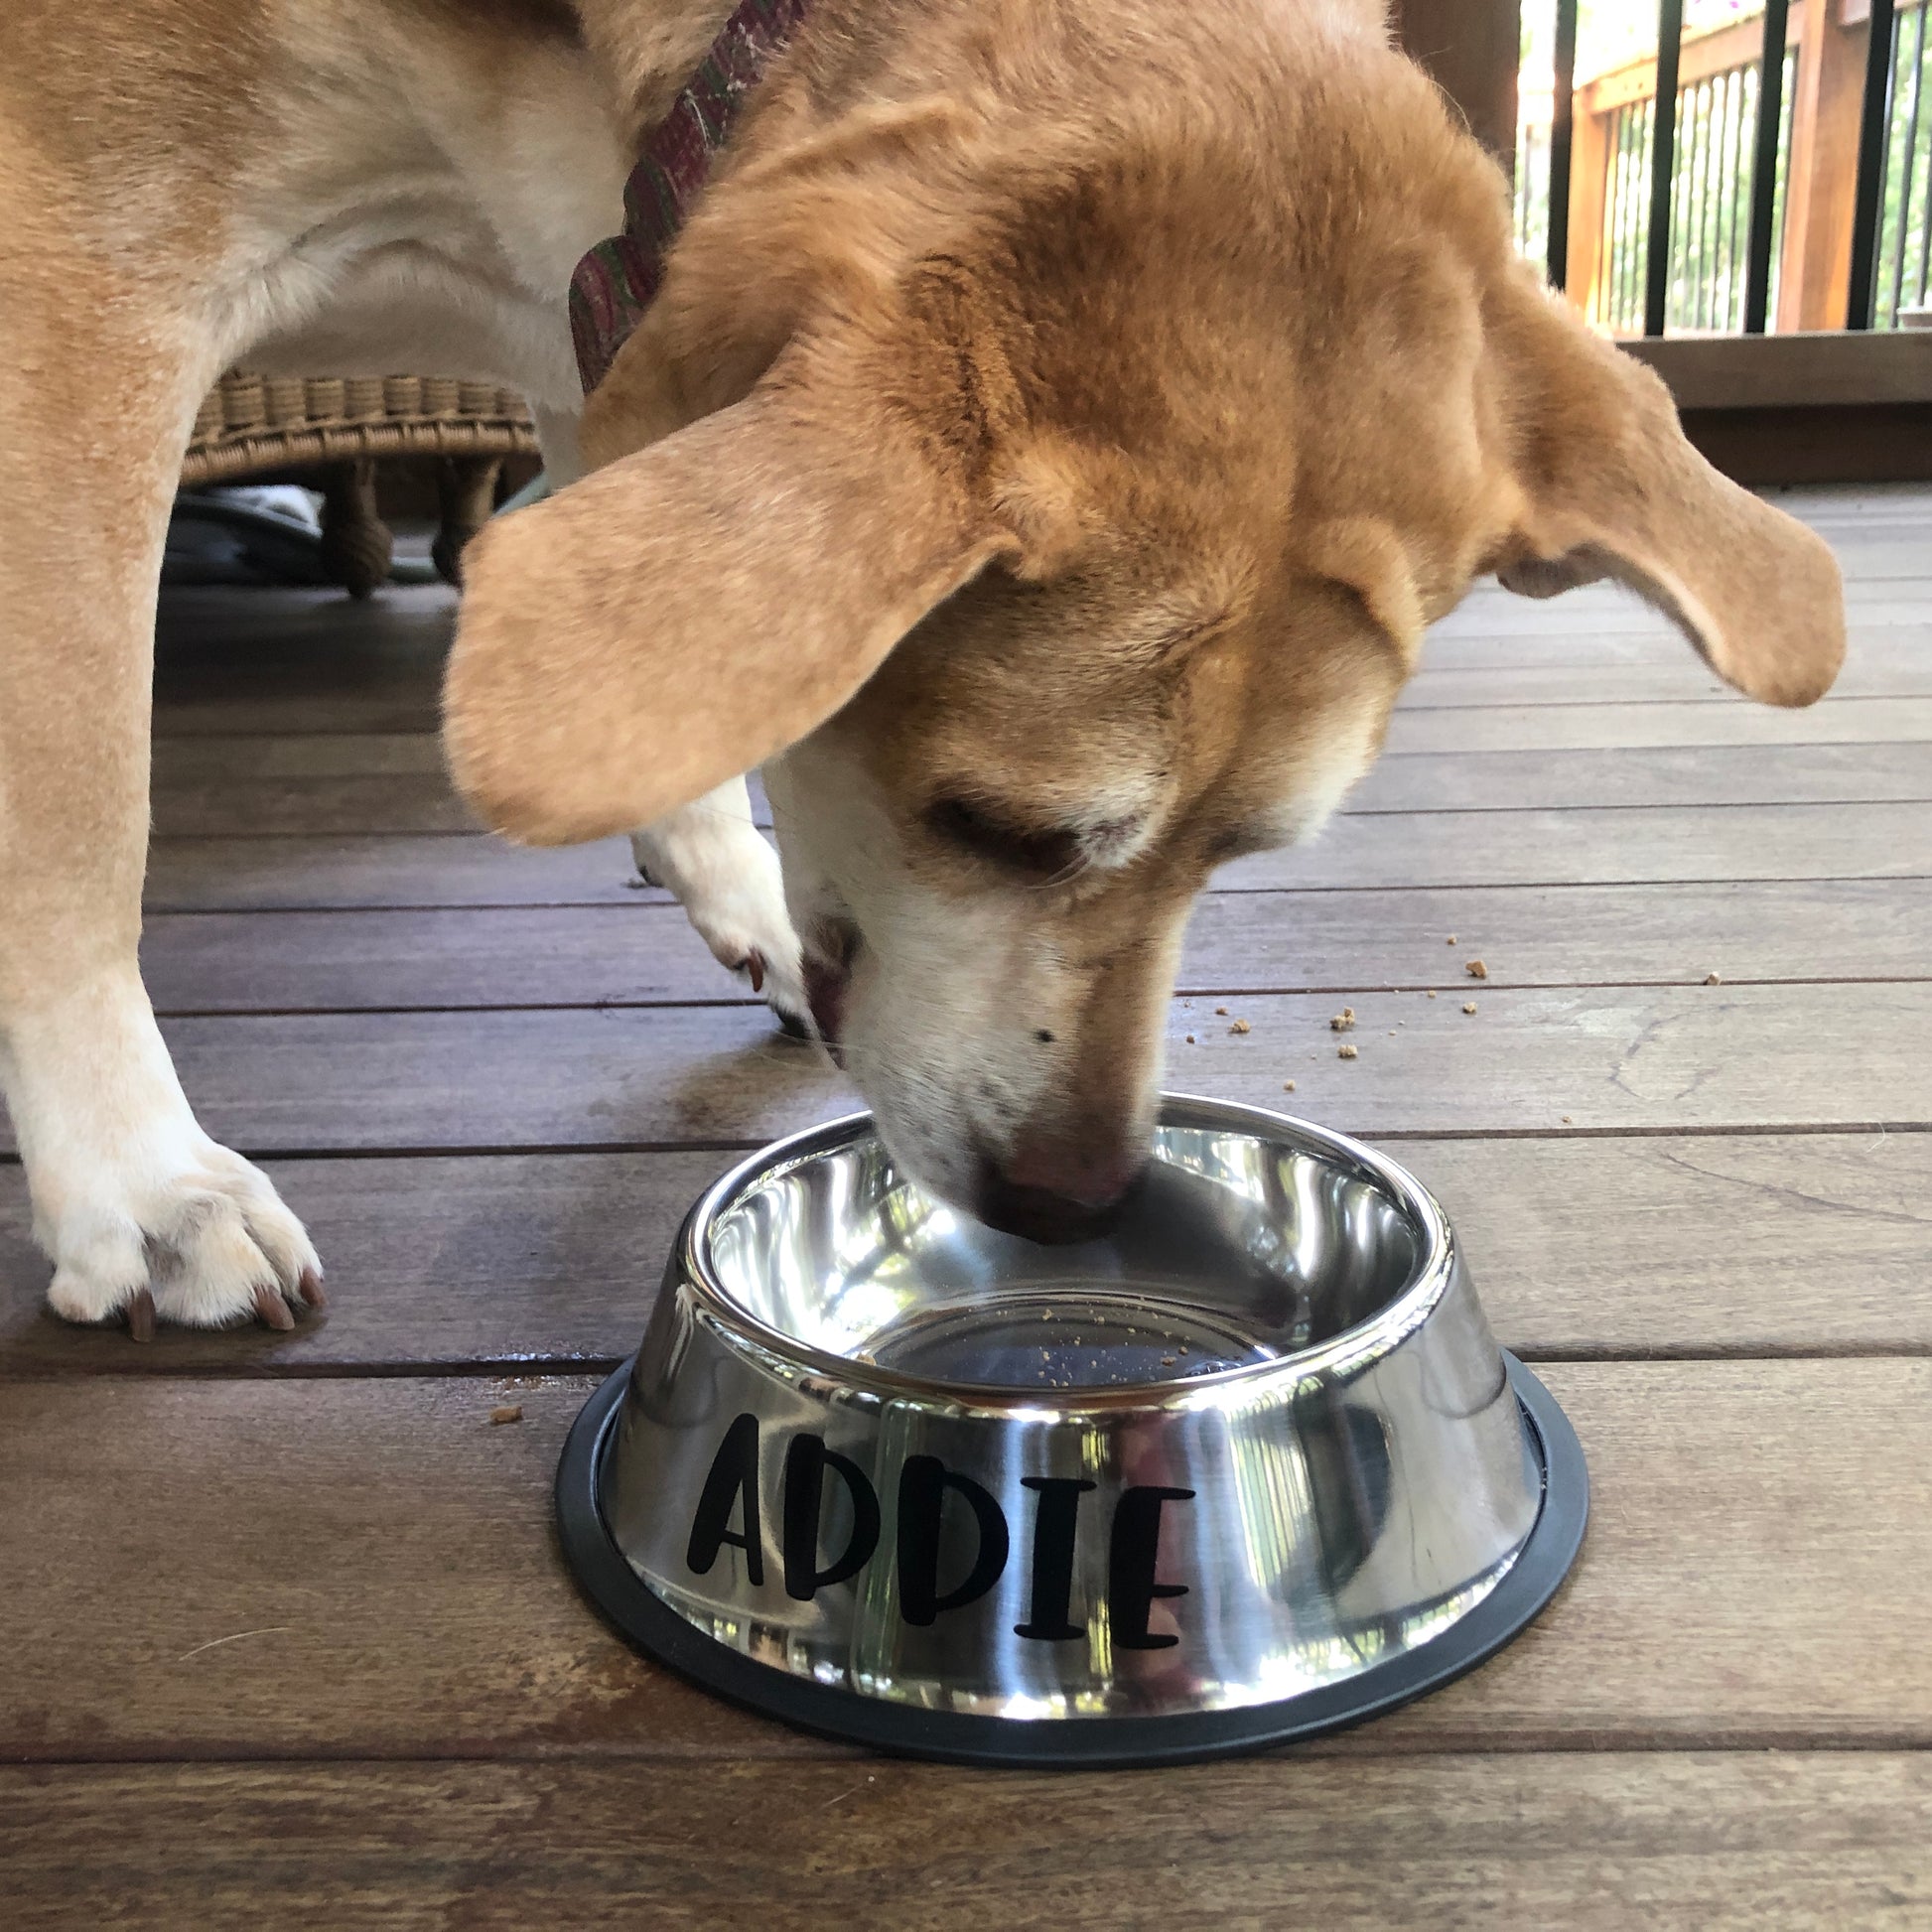 Addie Dog eating from personalized dish